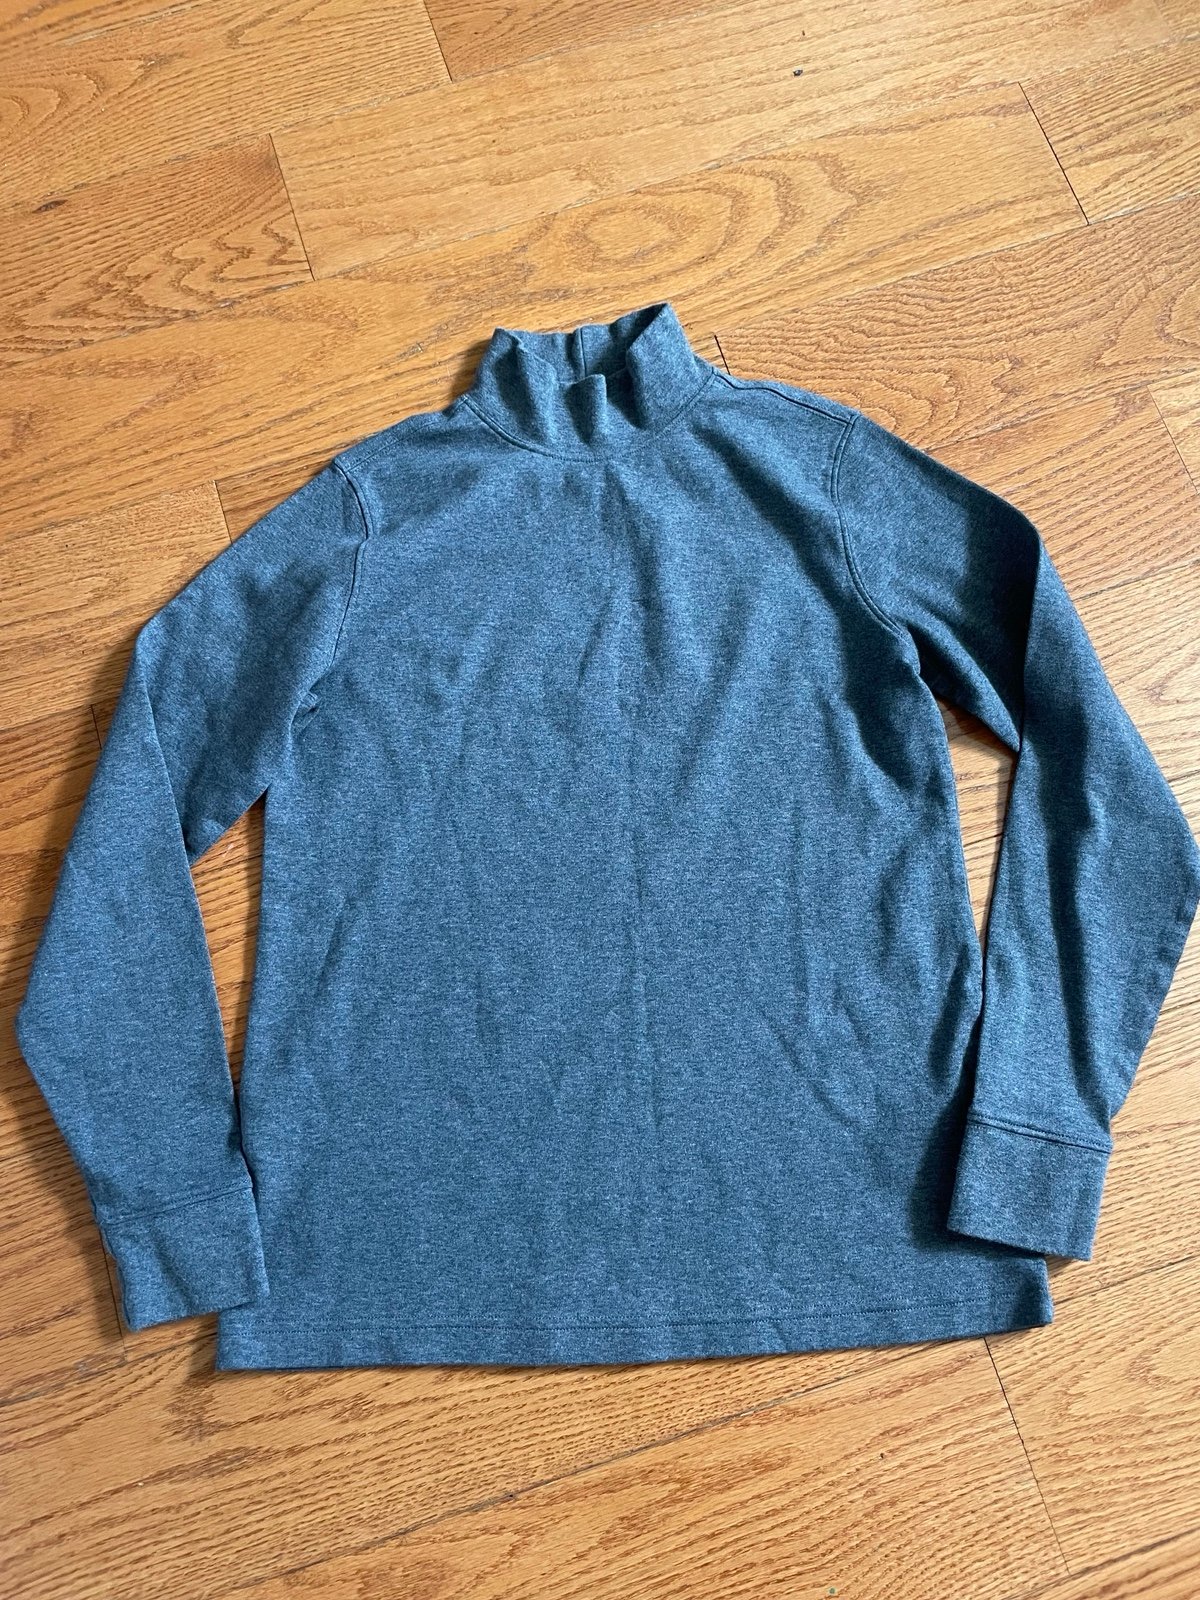 the Lowest price Women’s Land’s End Relaxed Fit Grey Turtleneck Top XS P0yiWTsAf no tax